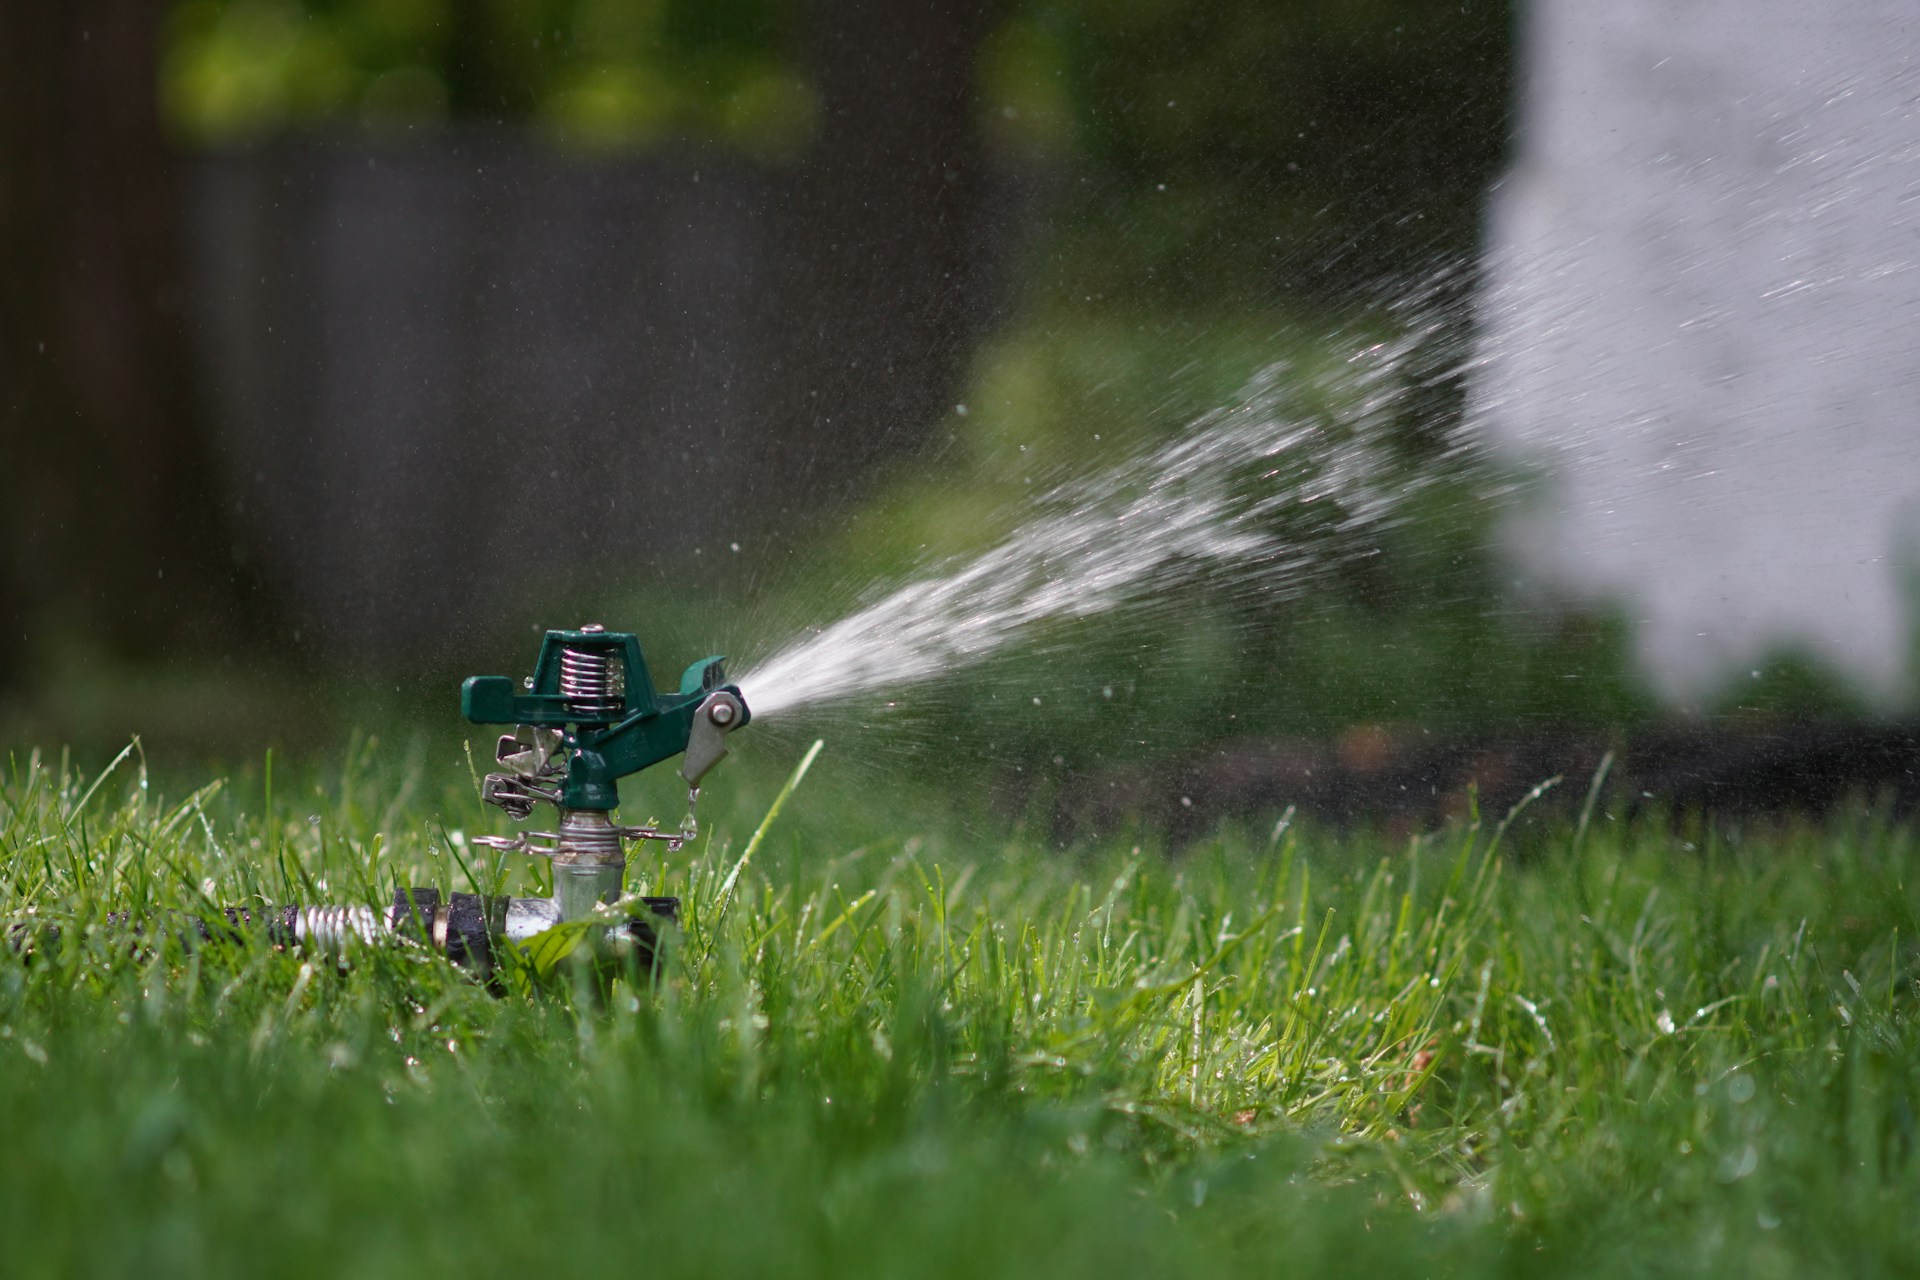 The Best Tools and Equipment for Sprinkler Repairs